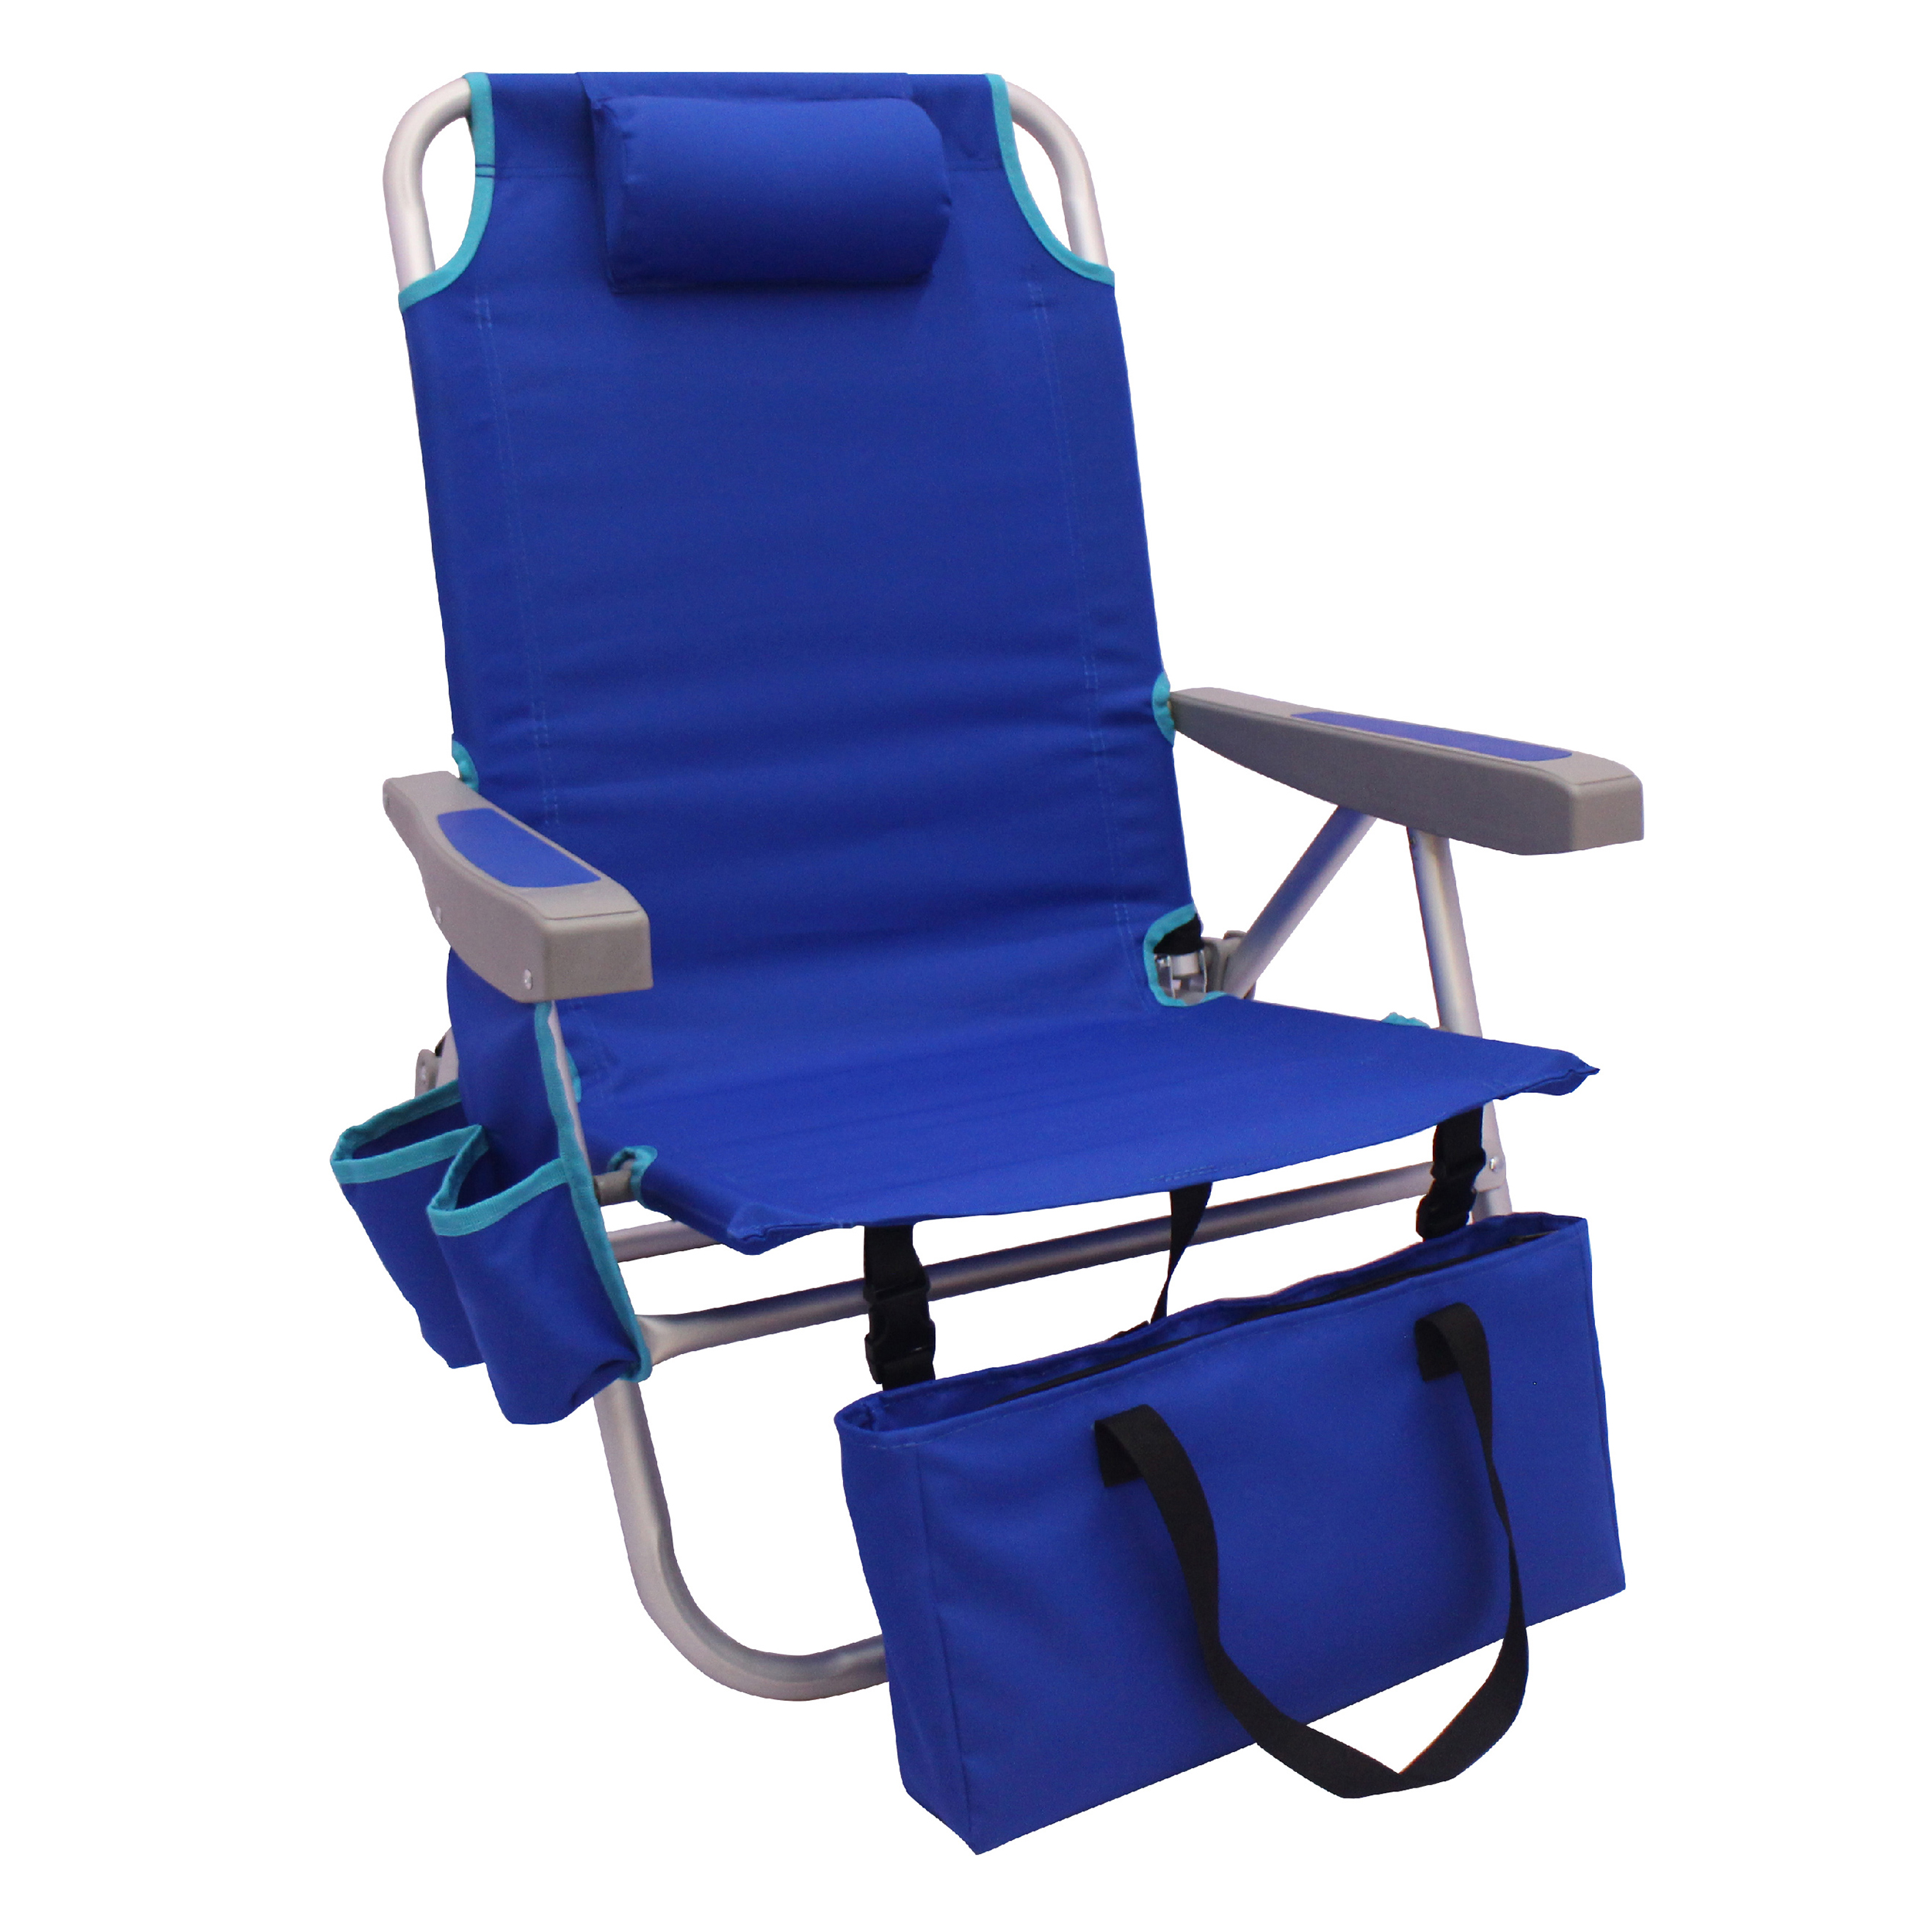 2-Pack Mainstays Reclining Beach & Event Backpack Chair with Cooler Bag Blue - image 4 of 12